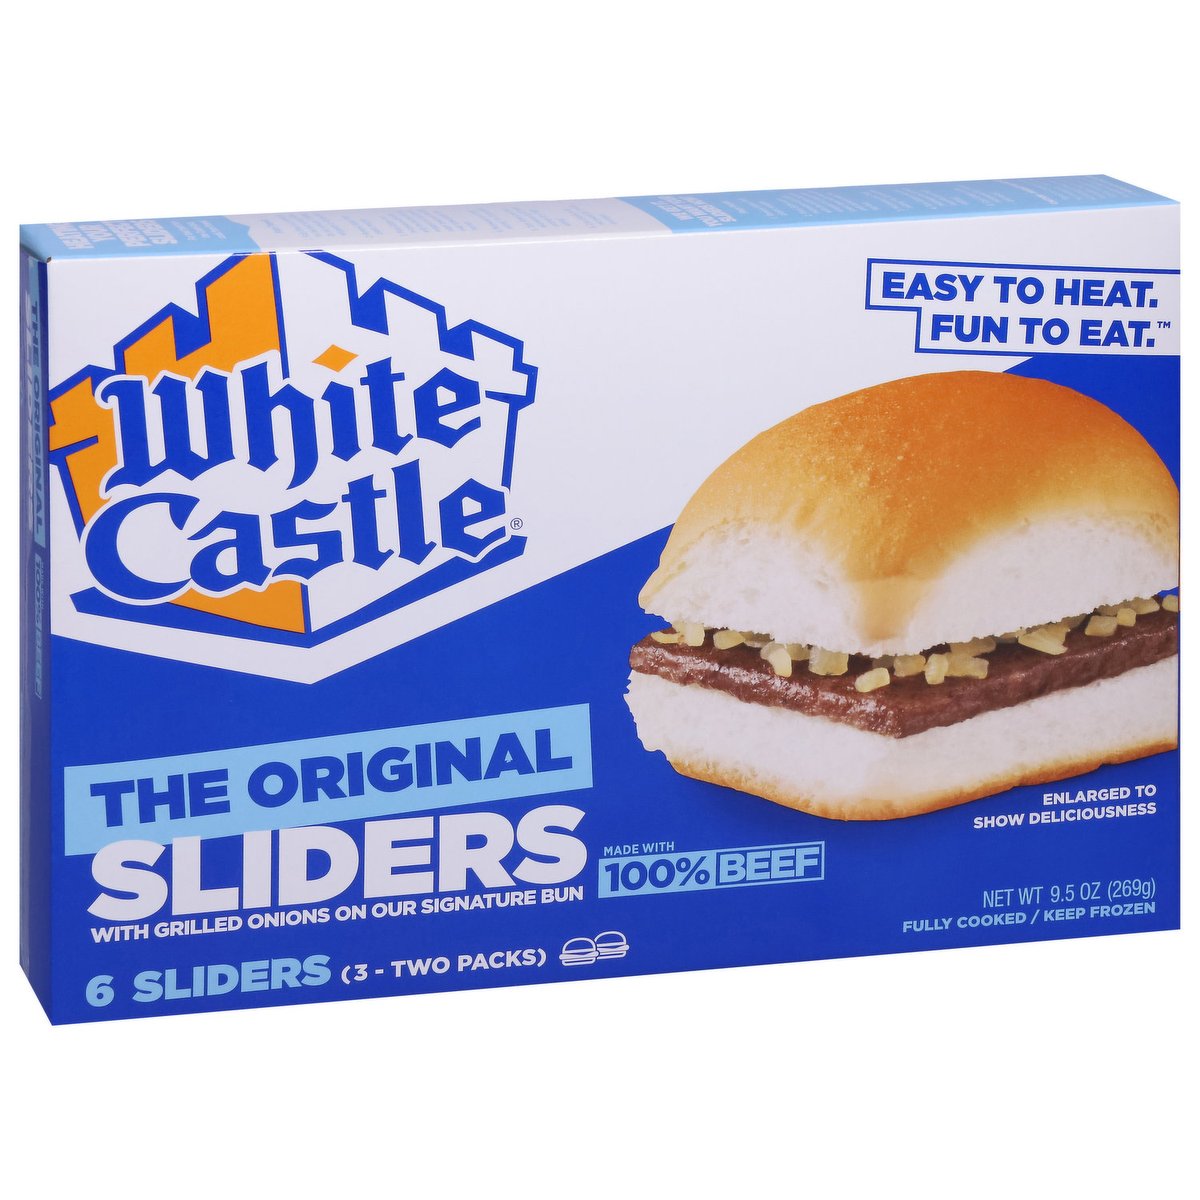 @__Slashy__ white castle easy to heat fun to heat the original sliders with grilled onions on our signature bun made with %100 beef enlarged to show deliciousness 6 sliders 3 -two packs net wt 9.5 oz (269g) fully cooked / keep frozen